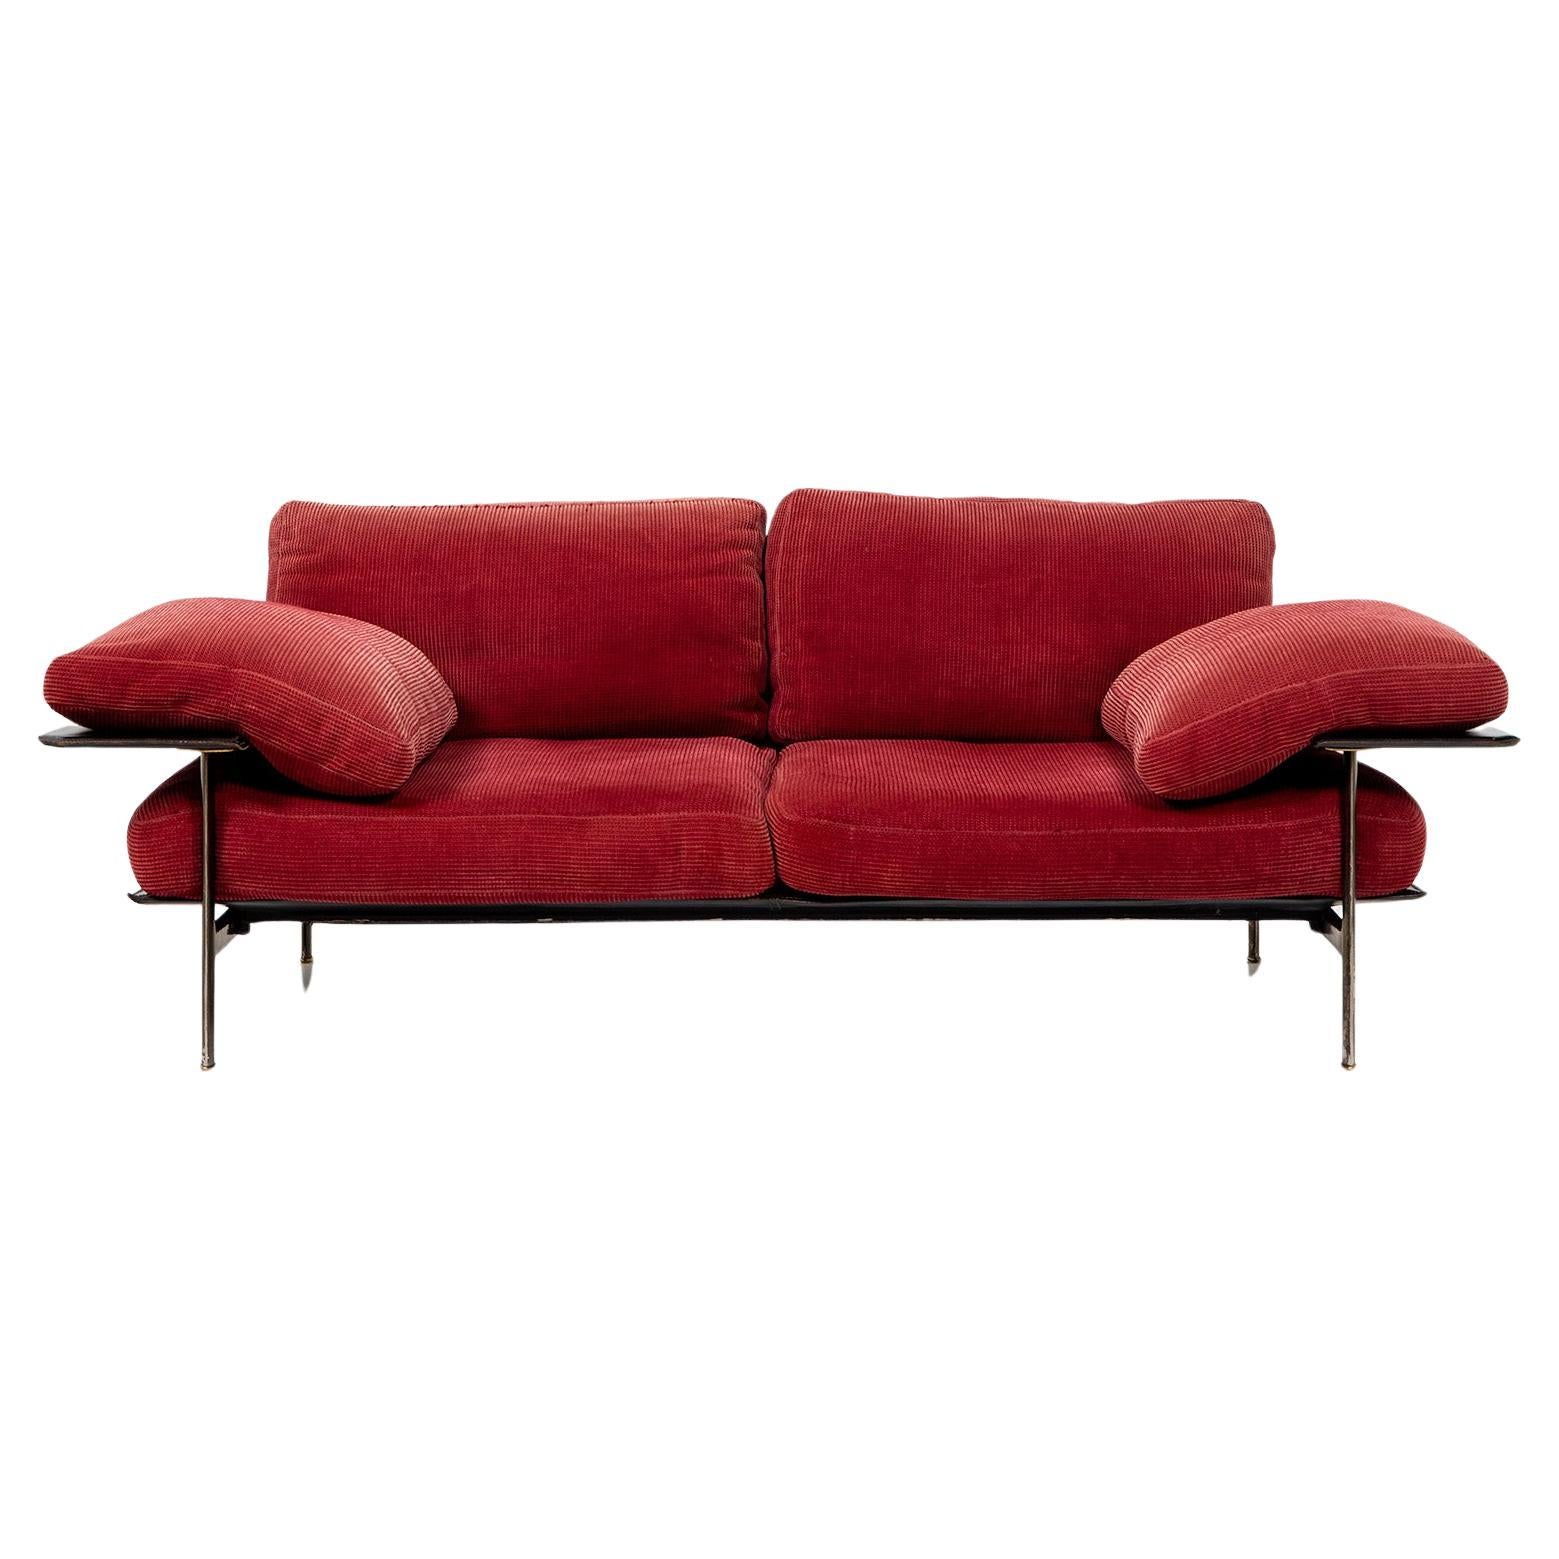 Pair of two-seater sofas, Diesis model, designed by Antonio Citterio and Paolo Nova for B&B Italia. The sofas stand on a metal frame and are fitted with thick cushions. The red upholstery fabric is lightly textured and in good, used condition. The